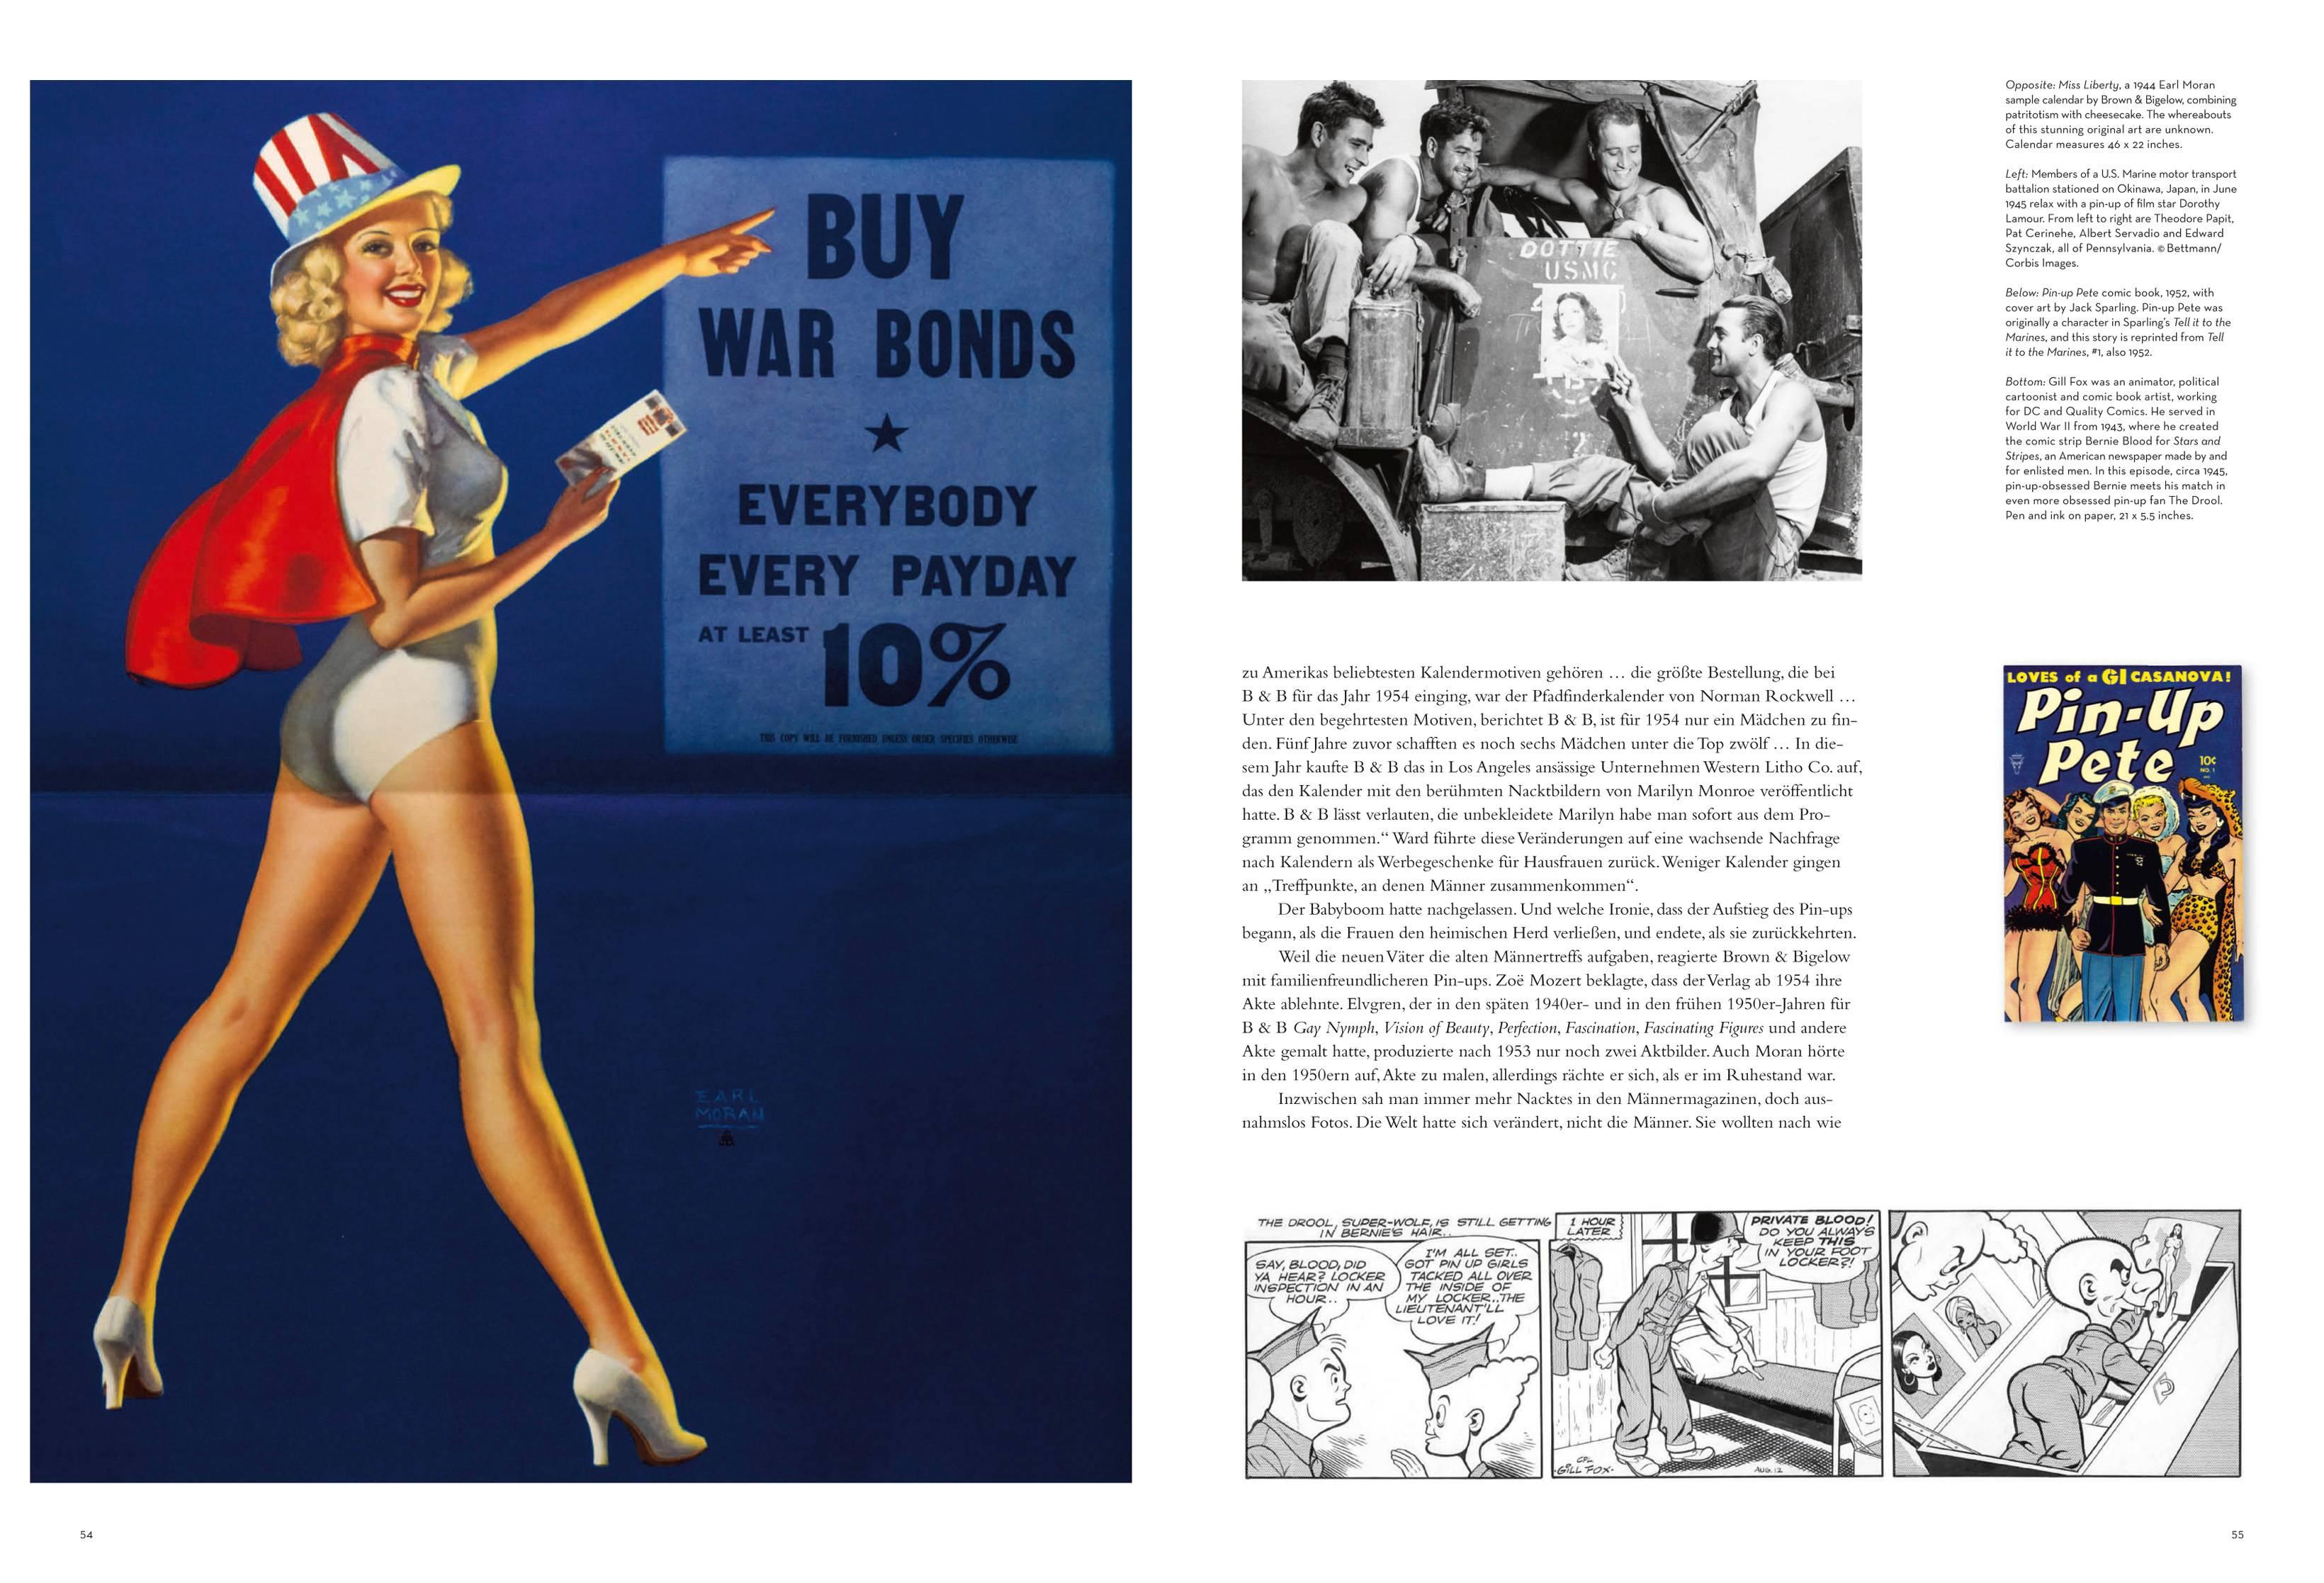 The Art of Pin-Up 4